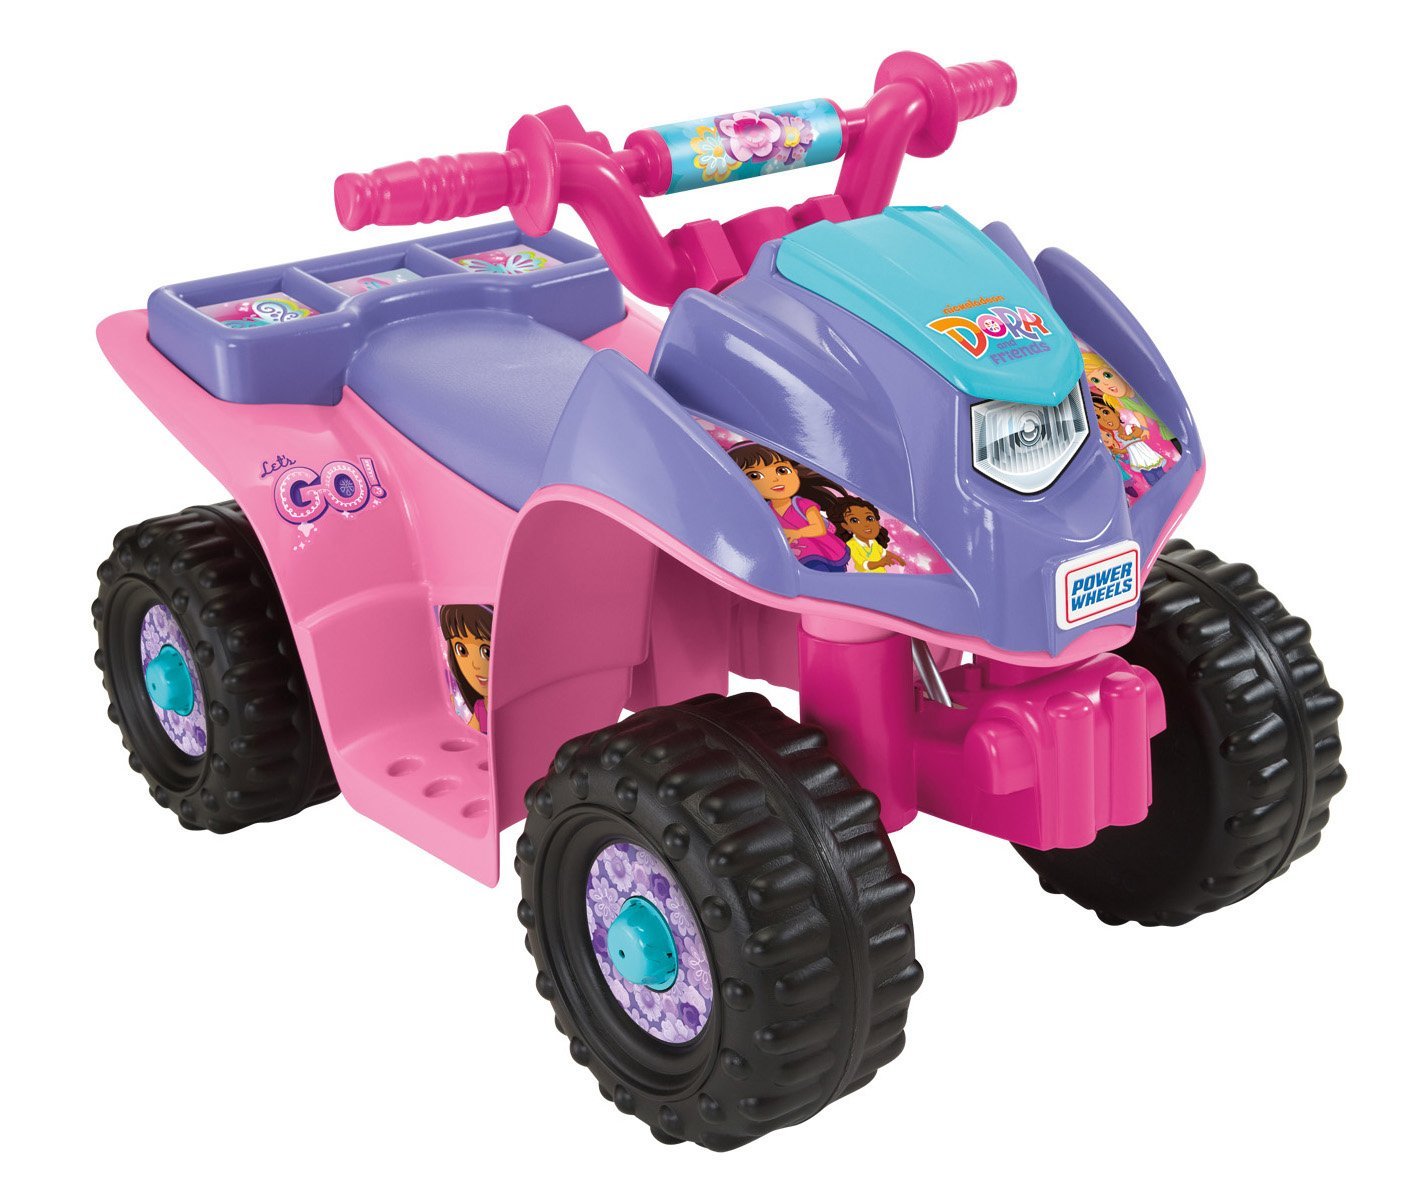 Power Wheels Nickelodeon Dora & Friends Lil Quad Only $45.00 Right Now!